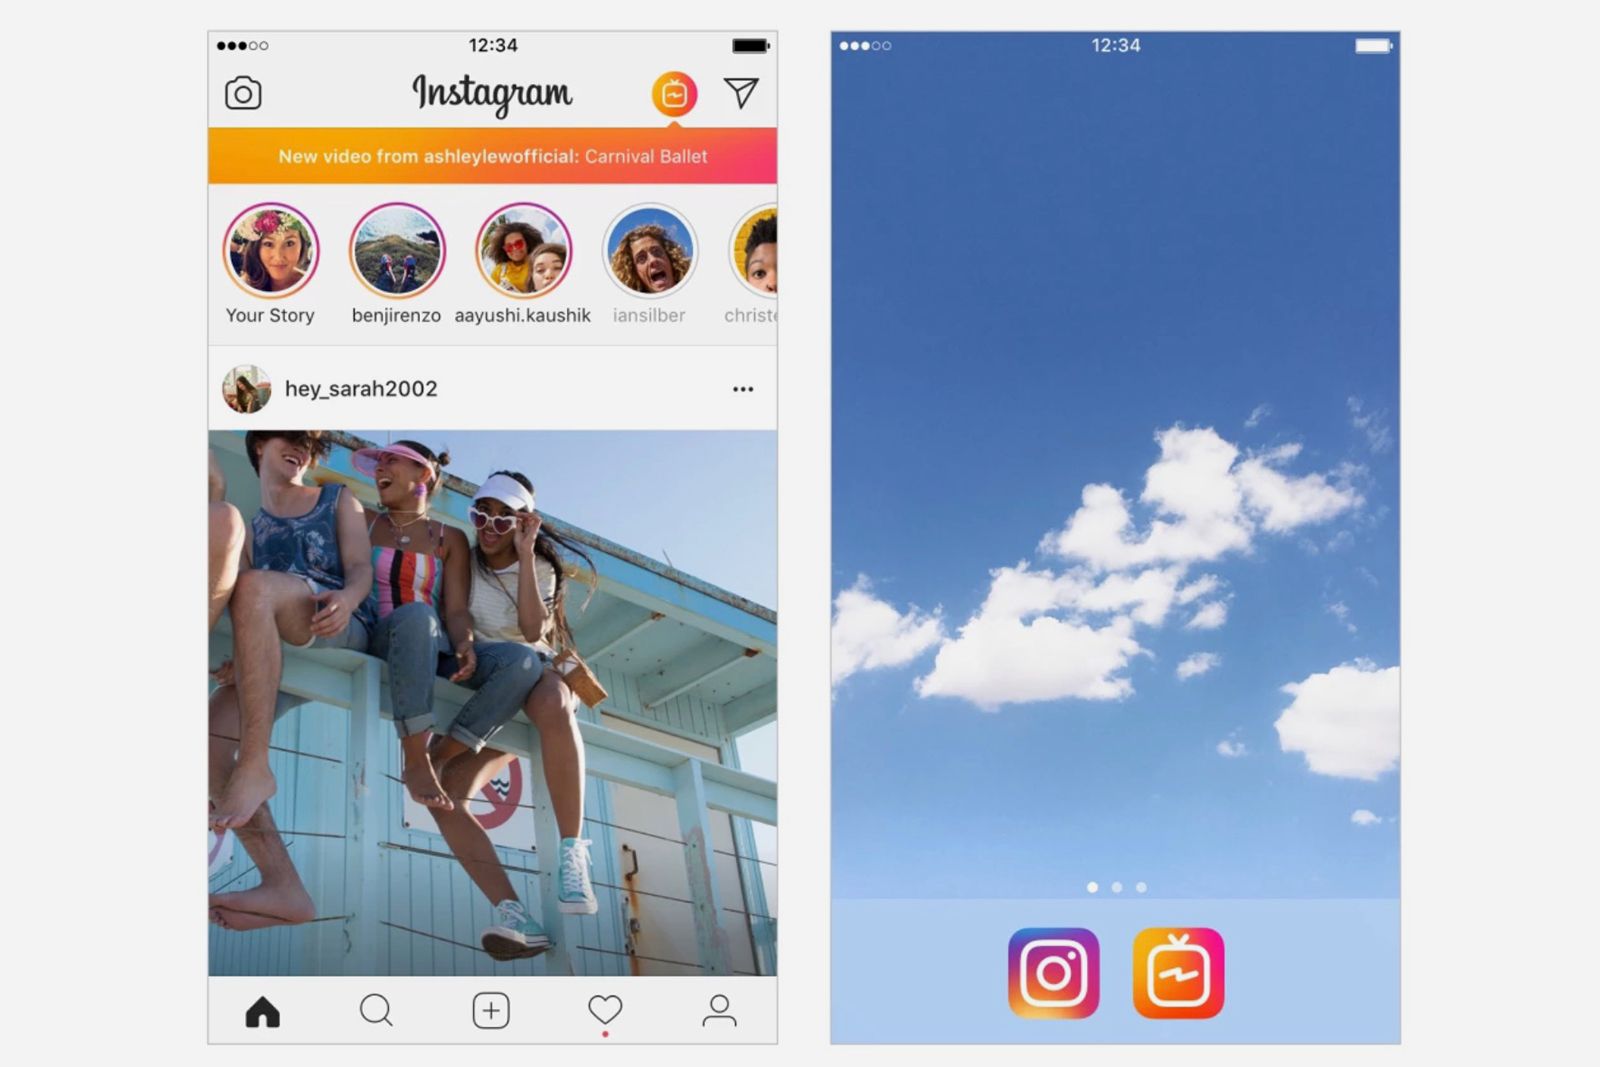 Igtv Everything You Need To Know About Instagrams Video App image 4